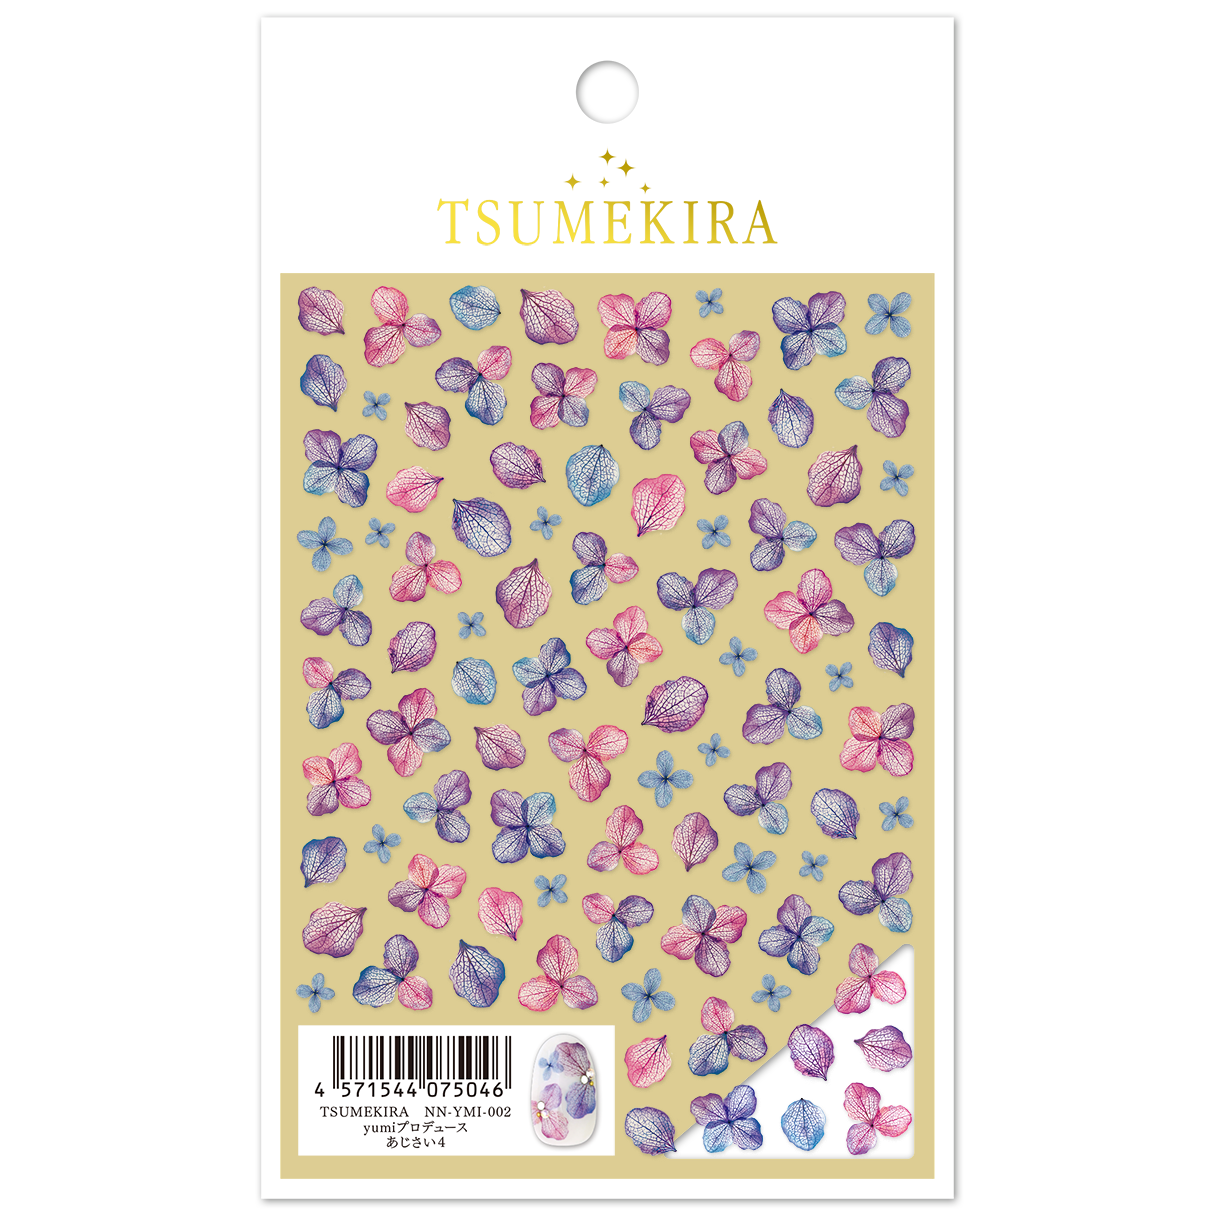 [On order/not returnable] NN-YMI-002 Yumi Produce Hydrangea 4 Claw Nail Stickers (sheets)